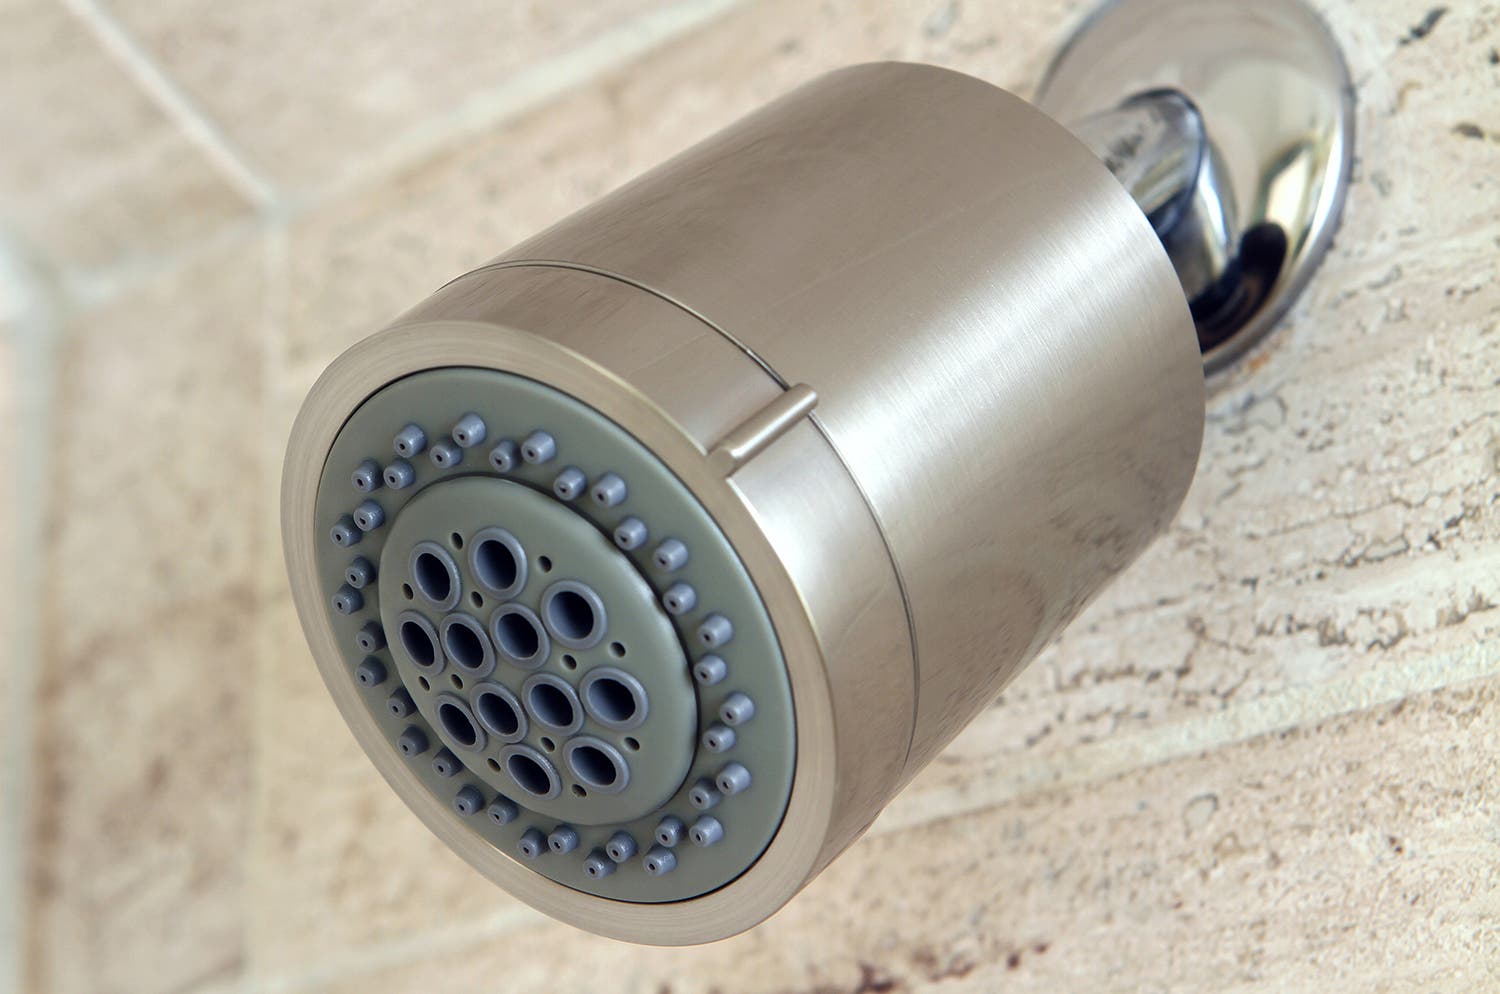 The Two-Function Shower Head from Showerscape adds Happiness to your Shower, KX8618